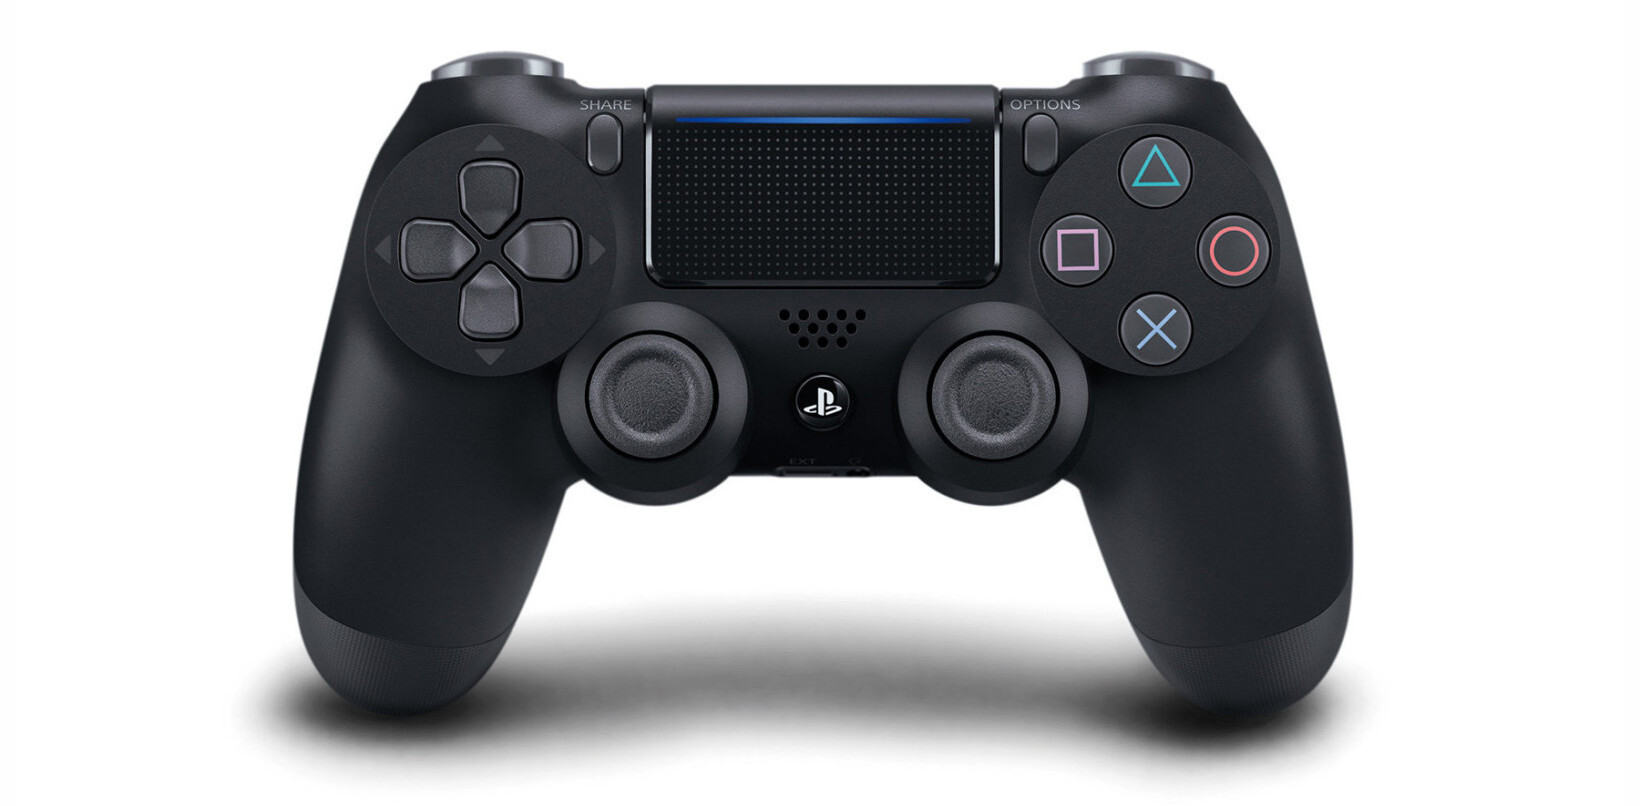 The PS4 controller will work with PS5, but not PS5 games